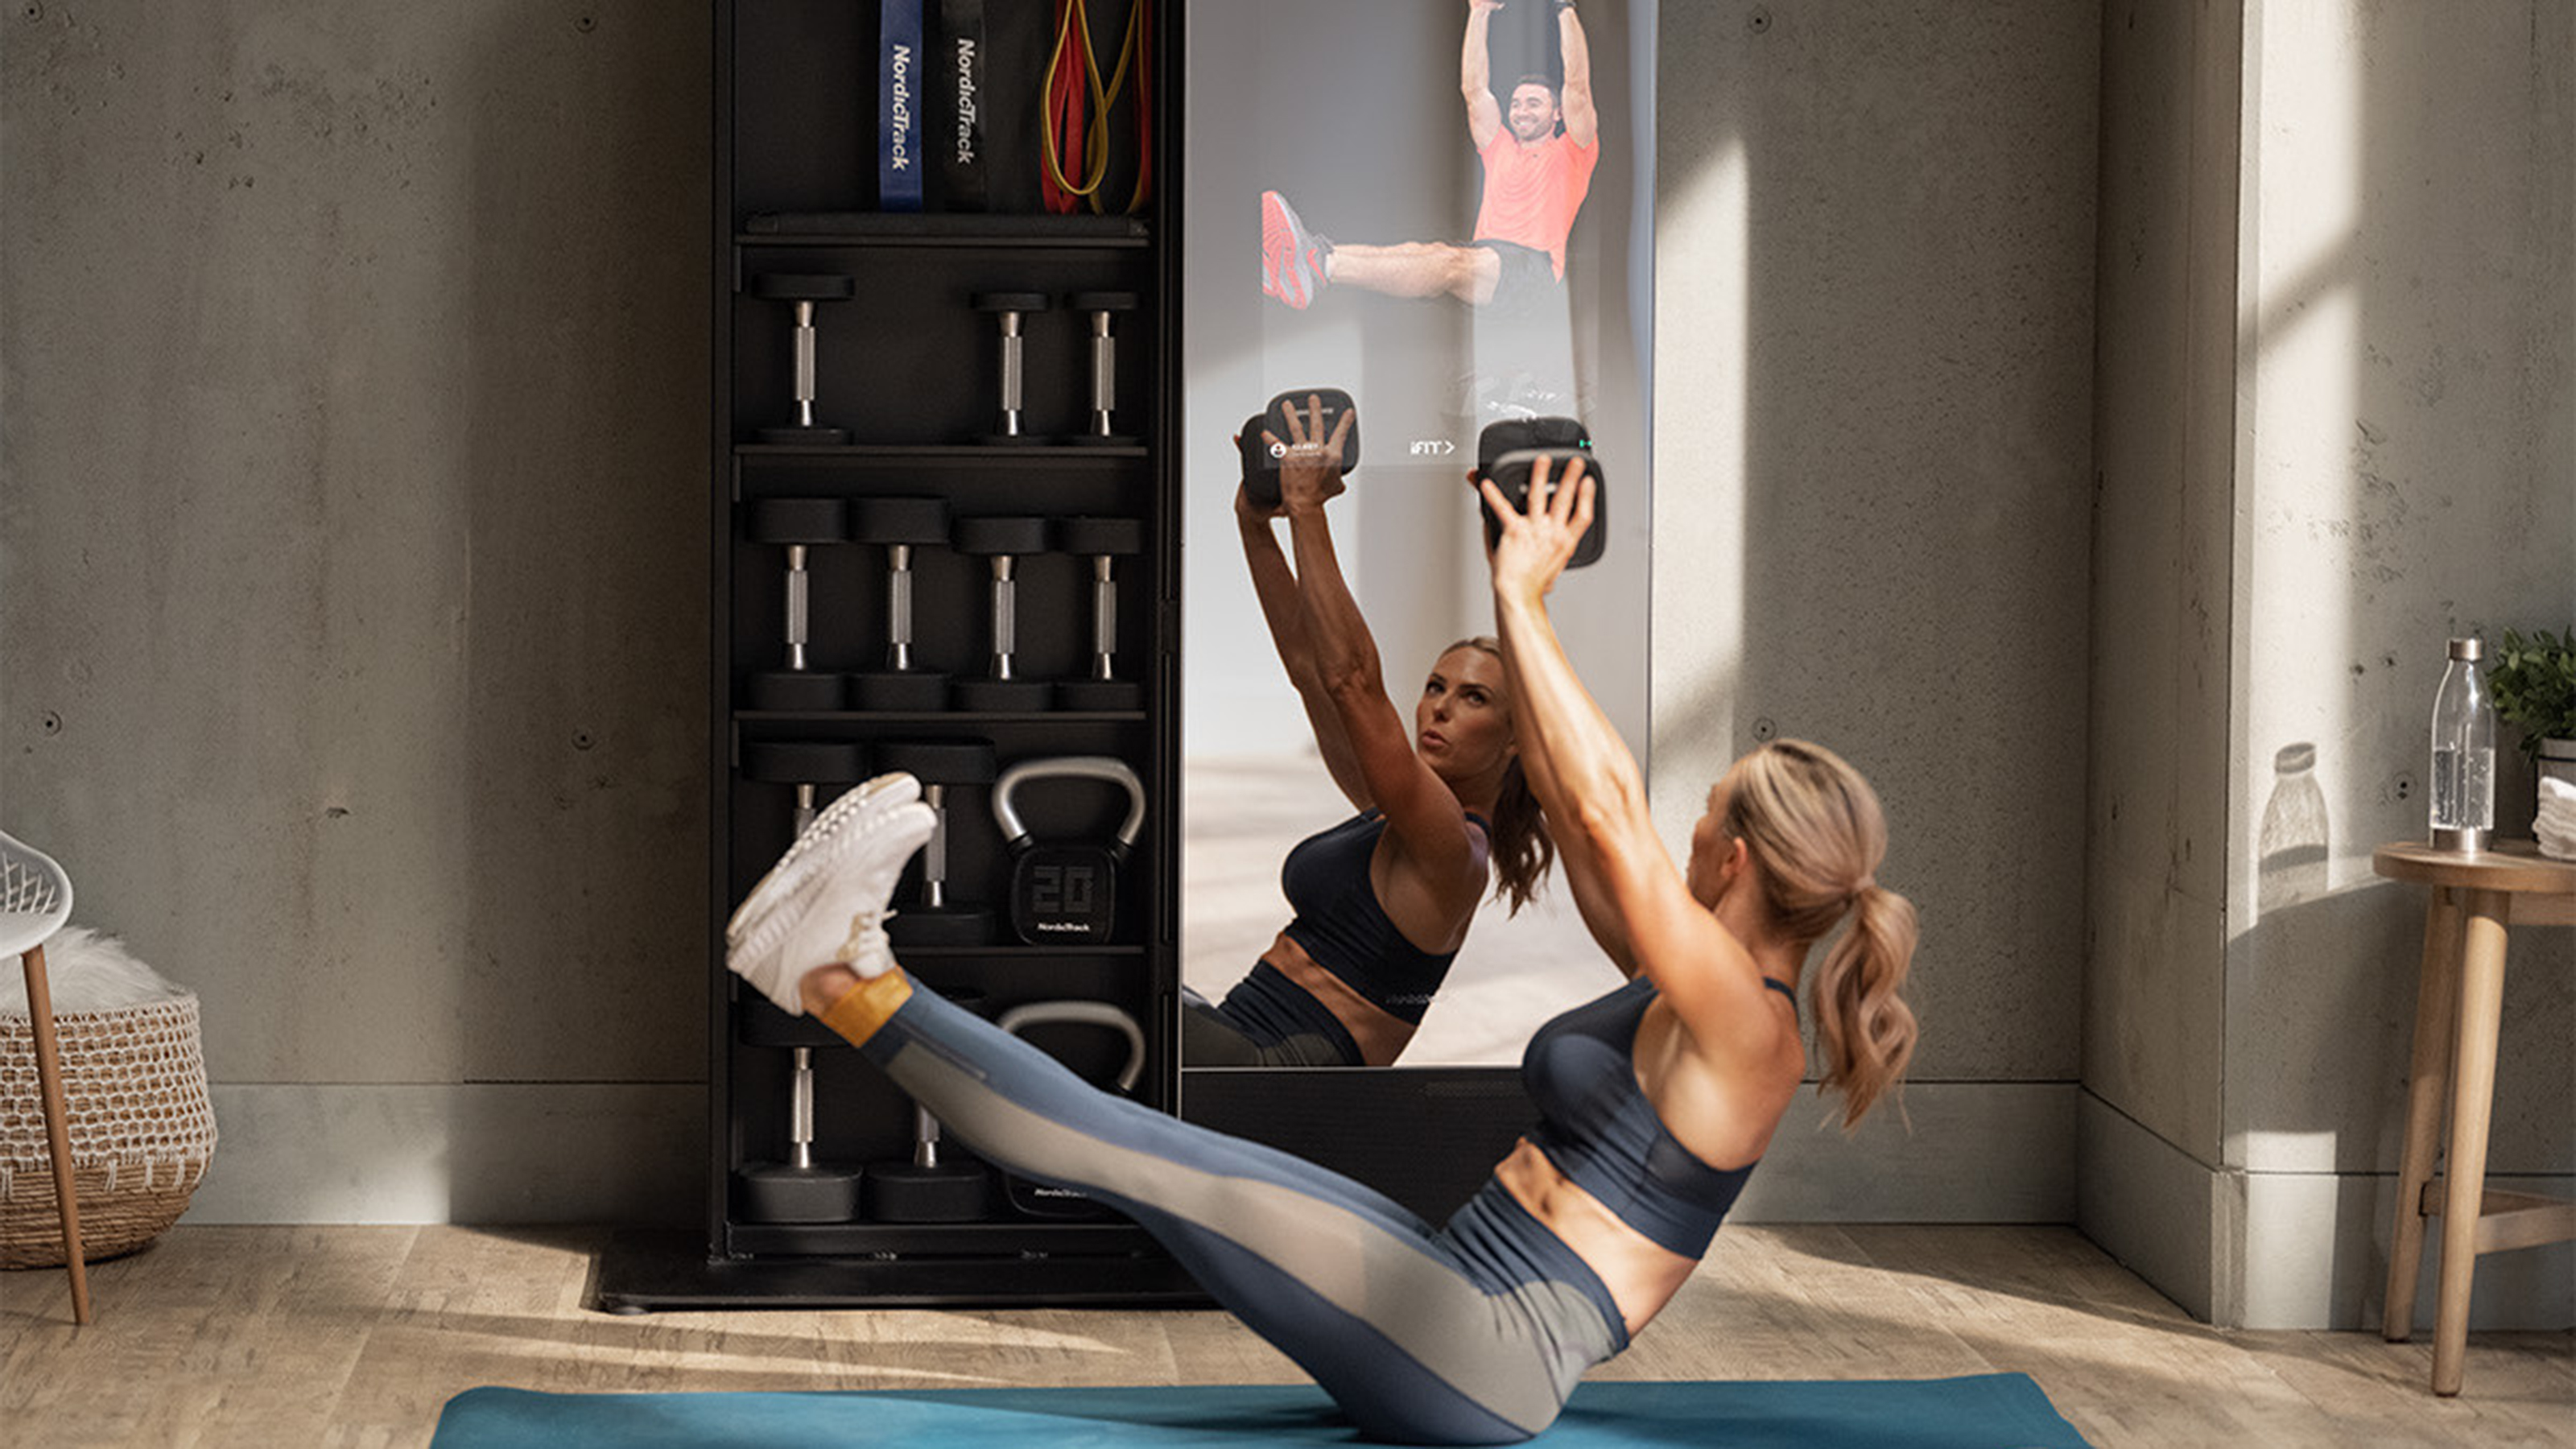 Gym Mirror Stock Photos and Images - 123RF